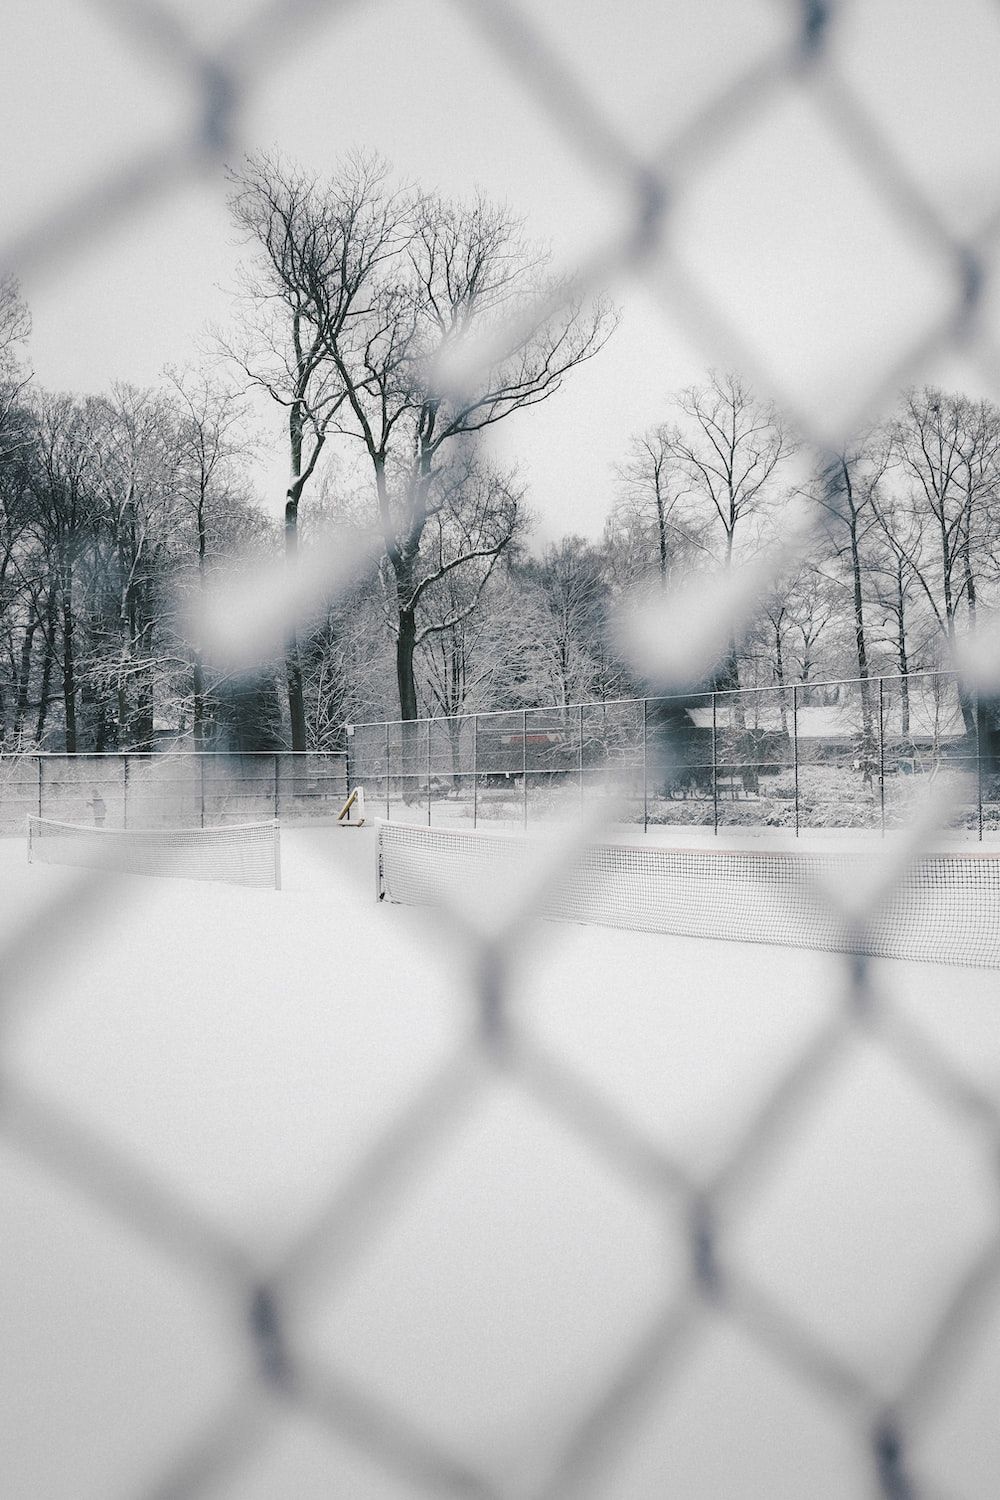 A chain link fence surrounds a snow covered tennis court. - Gray